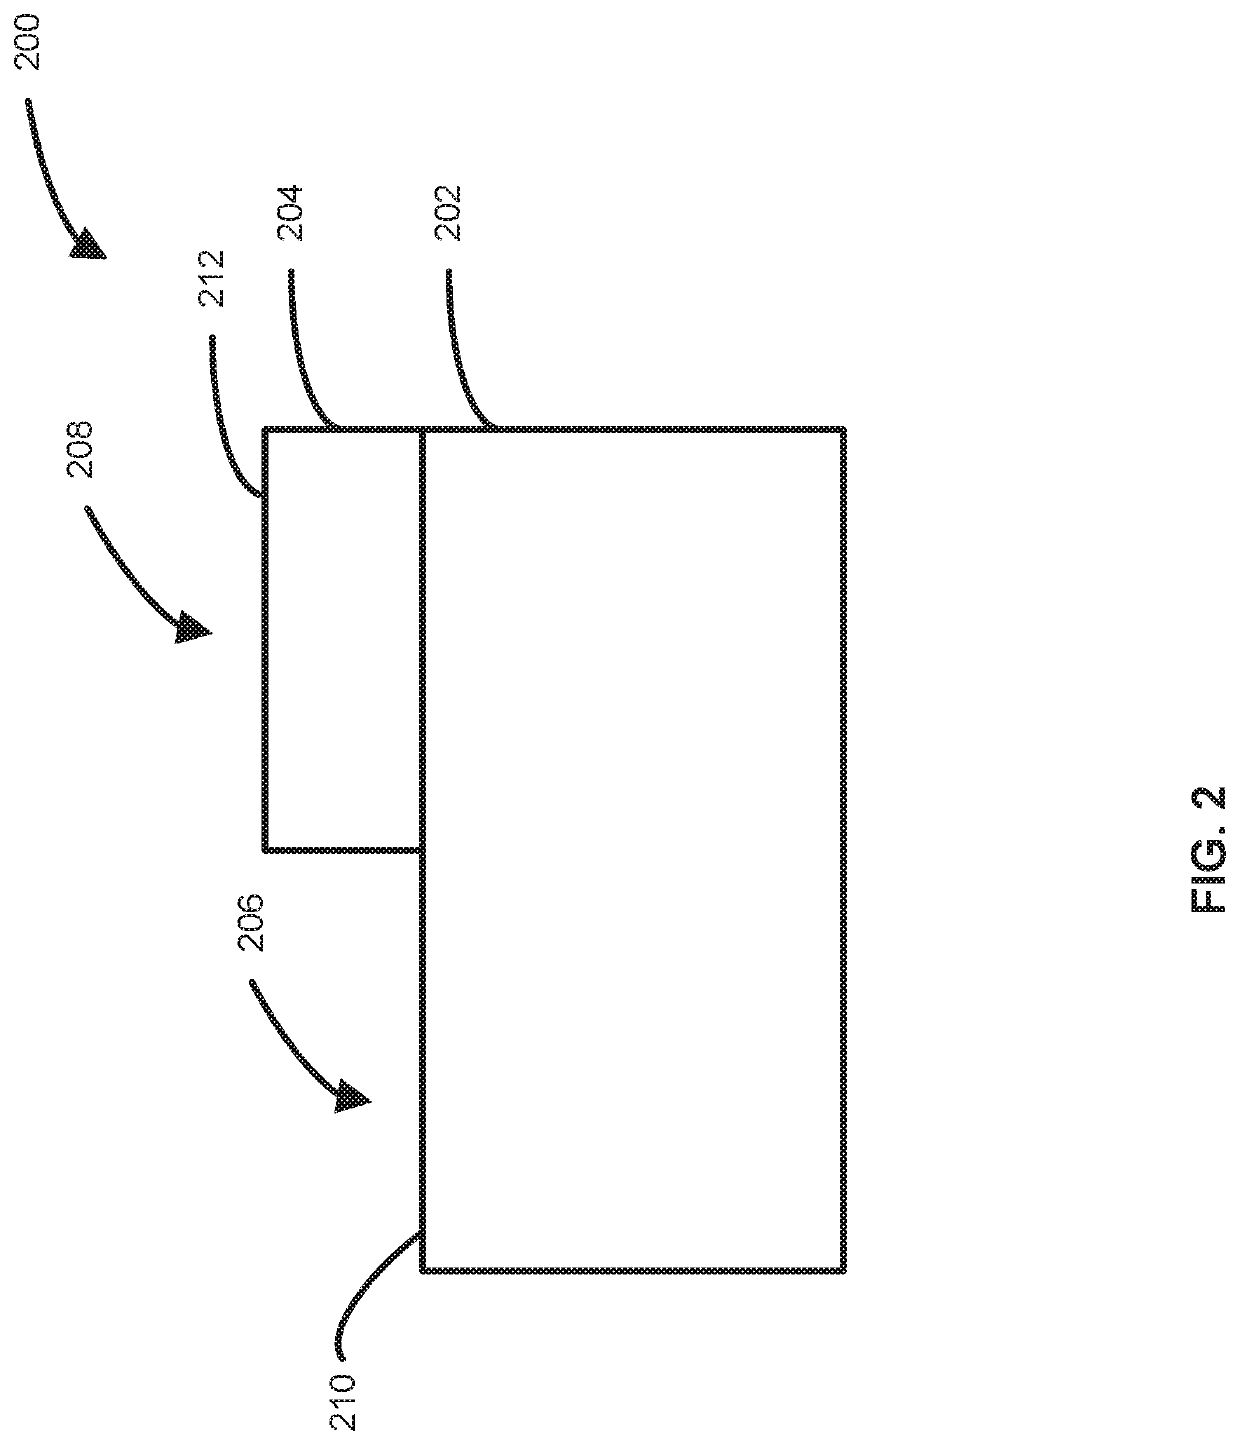 Methods for selective deposition using a sacrificial capping layer